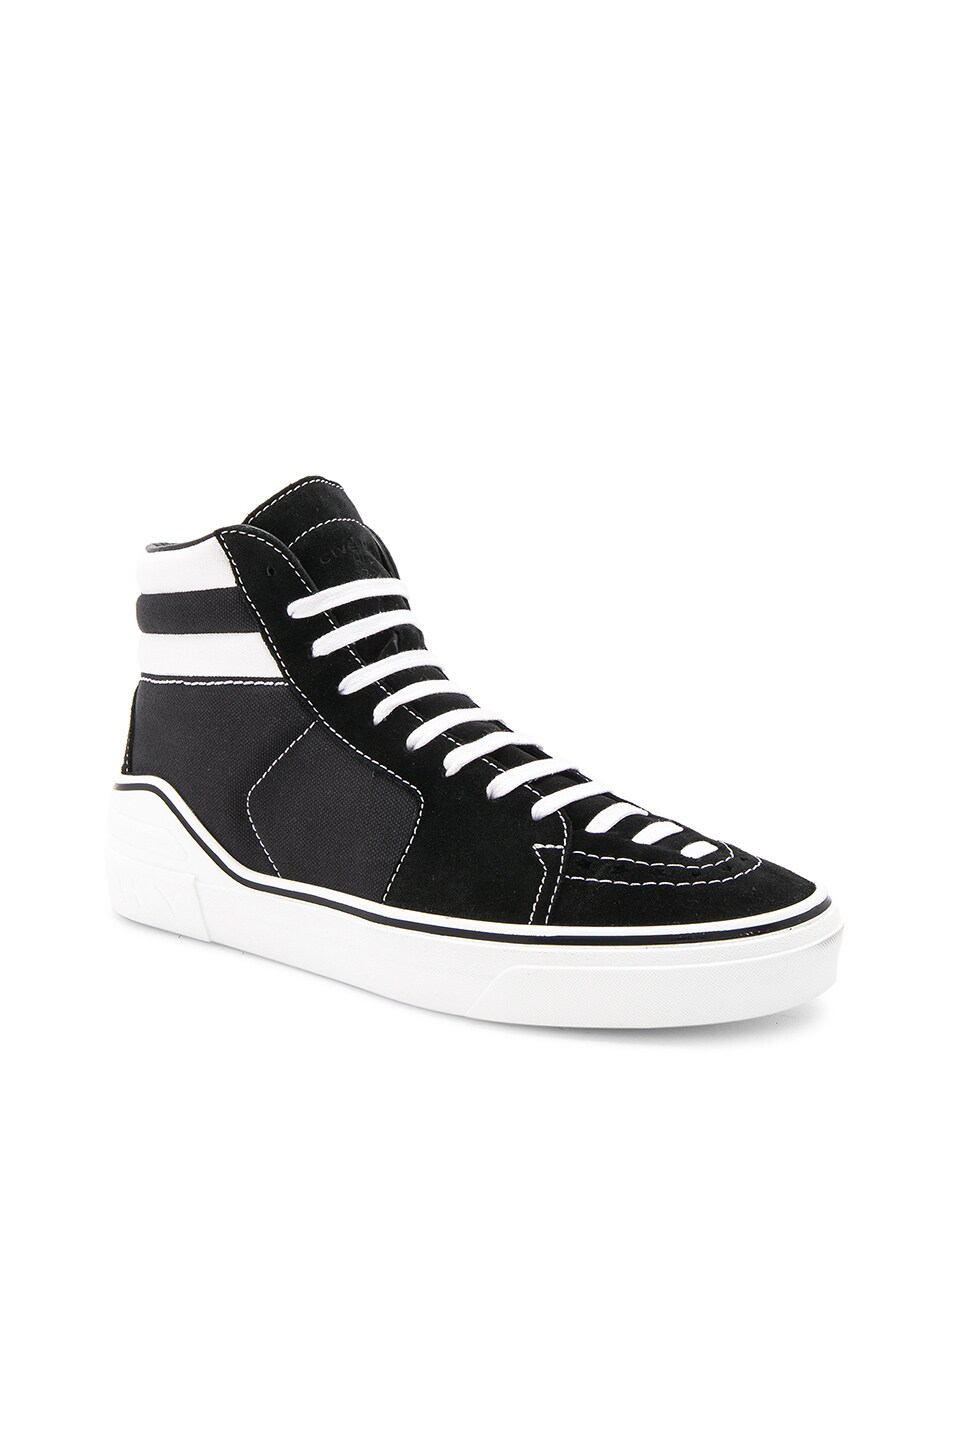 Givenchy Men'S George Canvas High-Top Sneakers, Black/White, Oxford ...